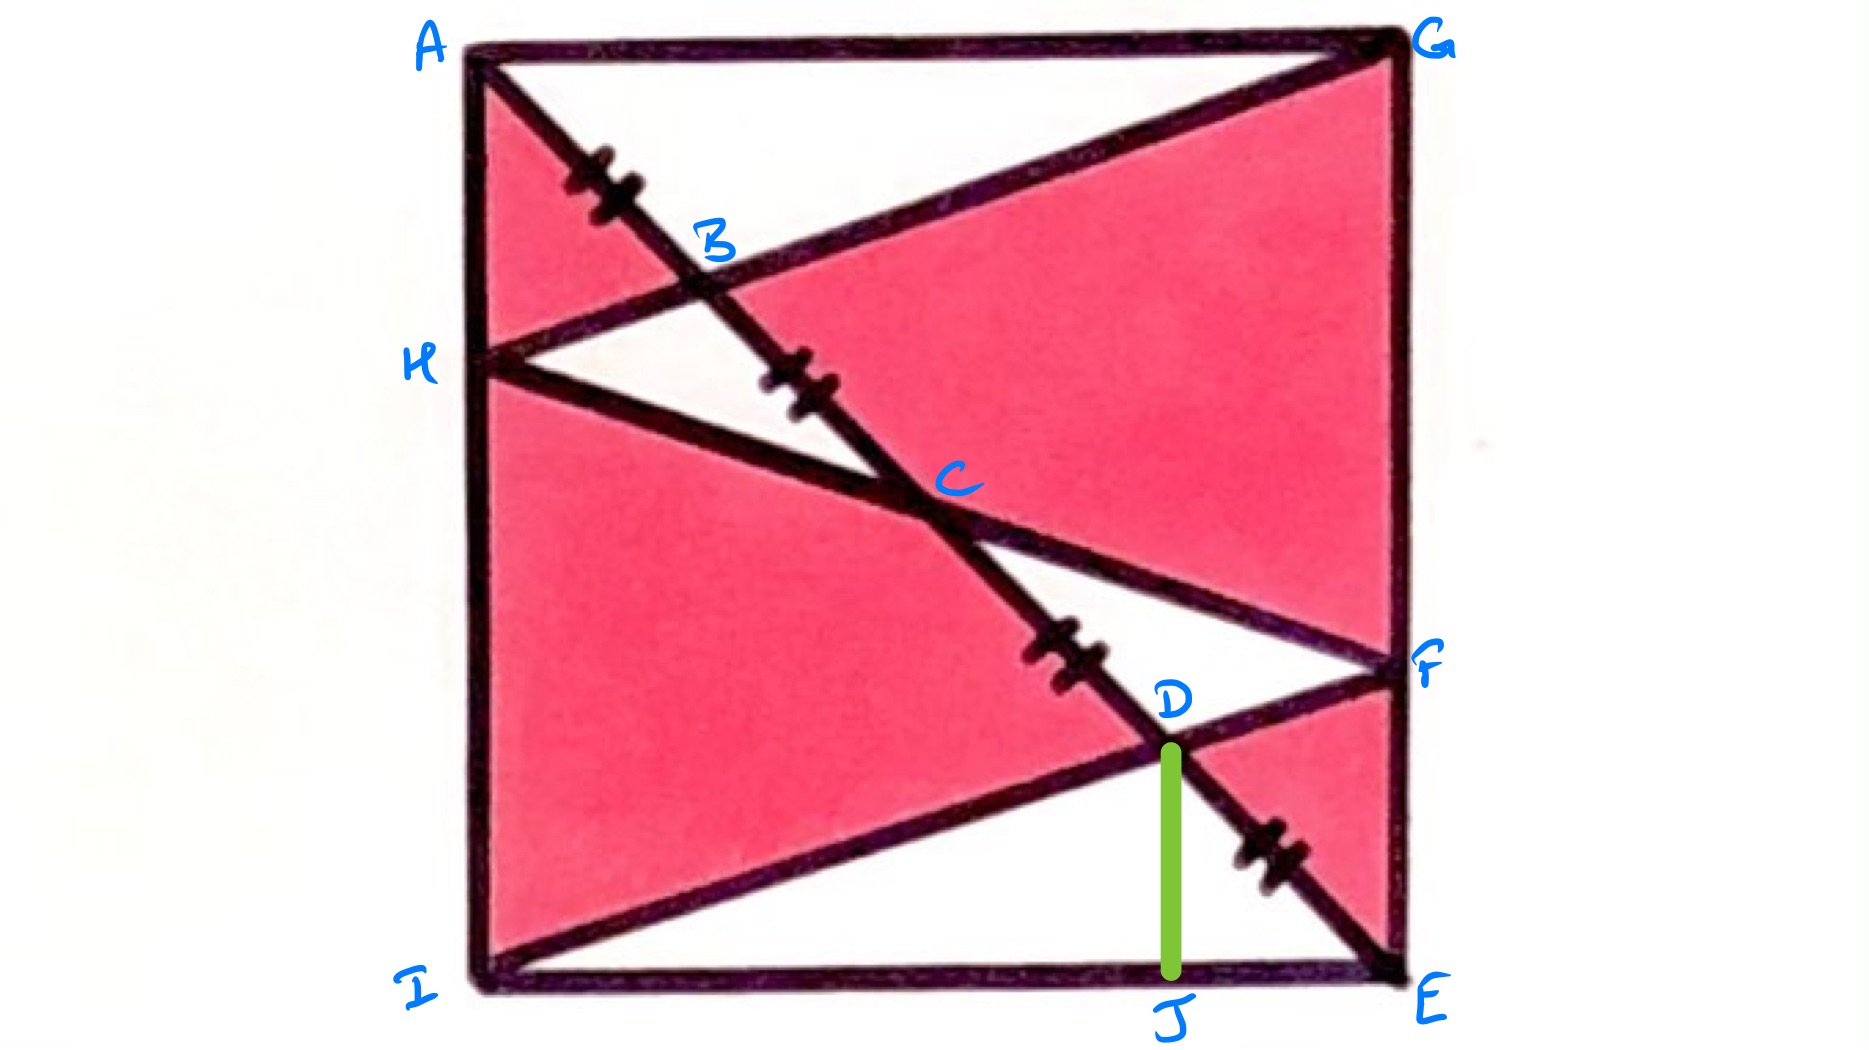 Zigzag inside a square labelled